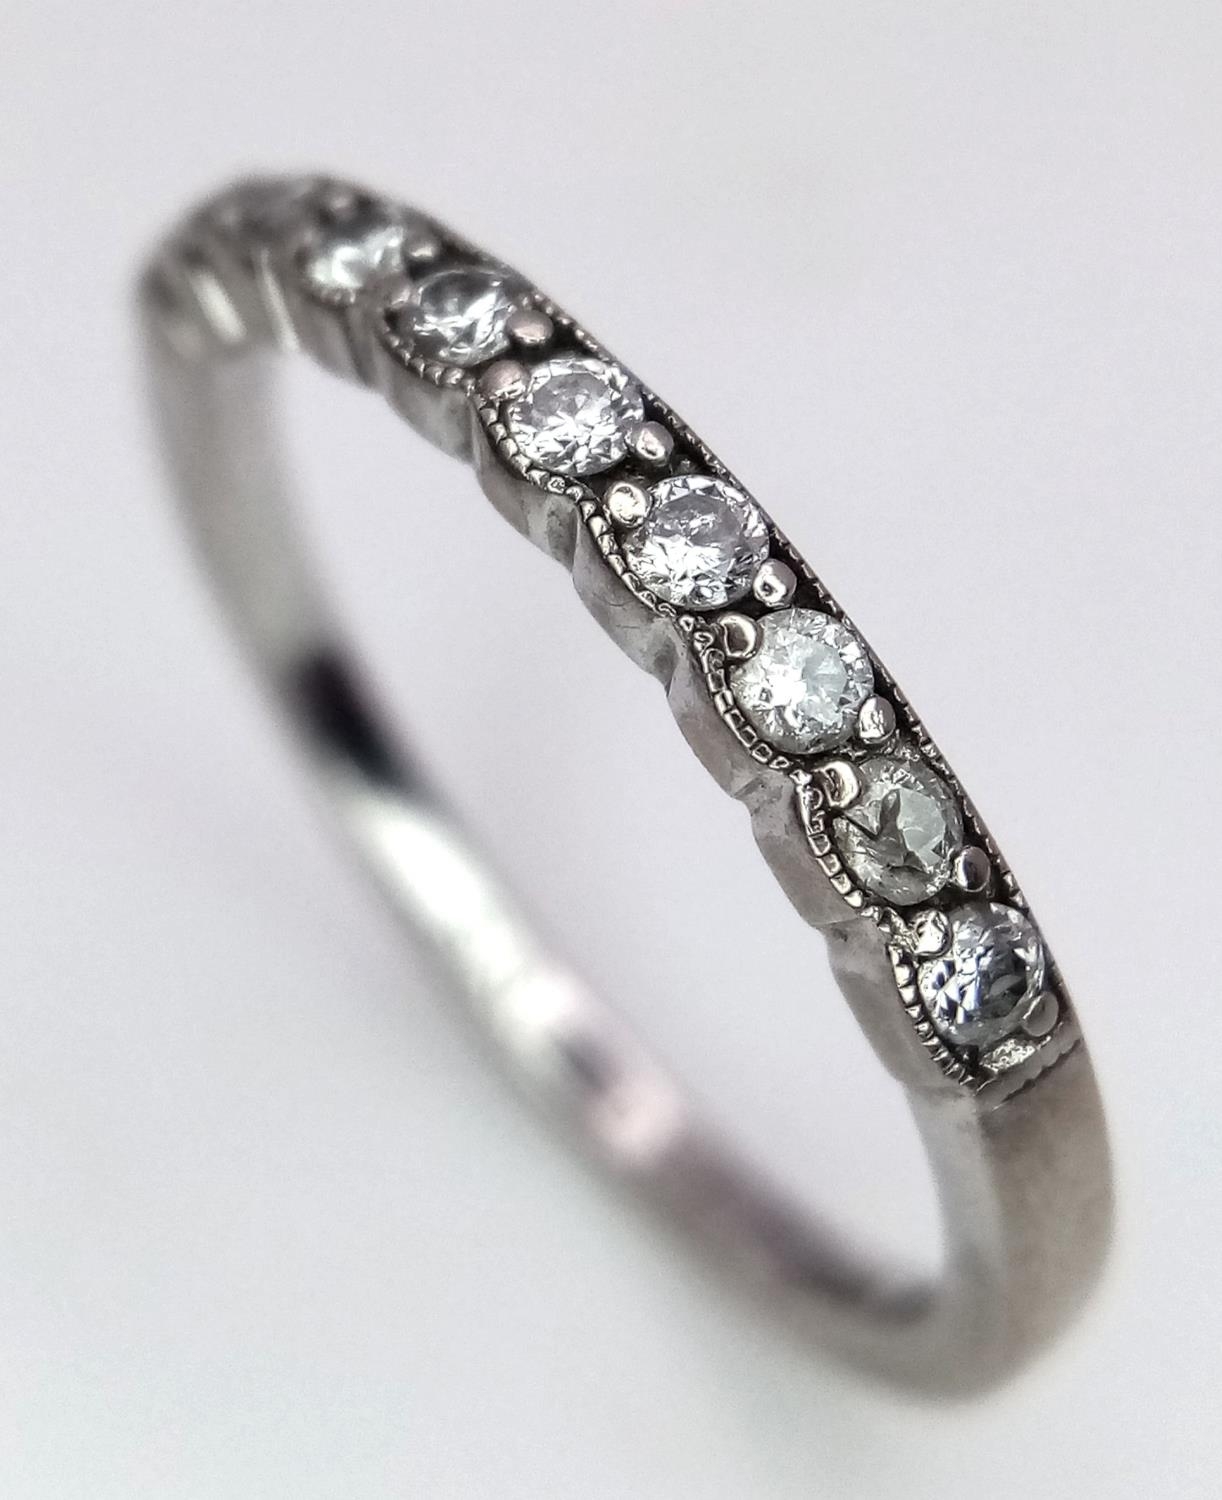 A Brown's Designer 18K White Gold and Diamond Half Eternity Ring. Size M. Comes with a Browns box. - Image 3 of 6